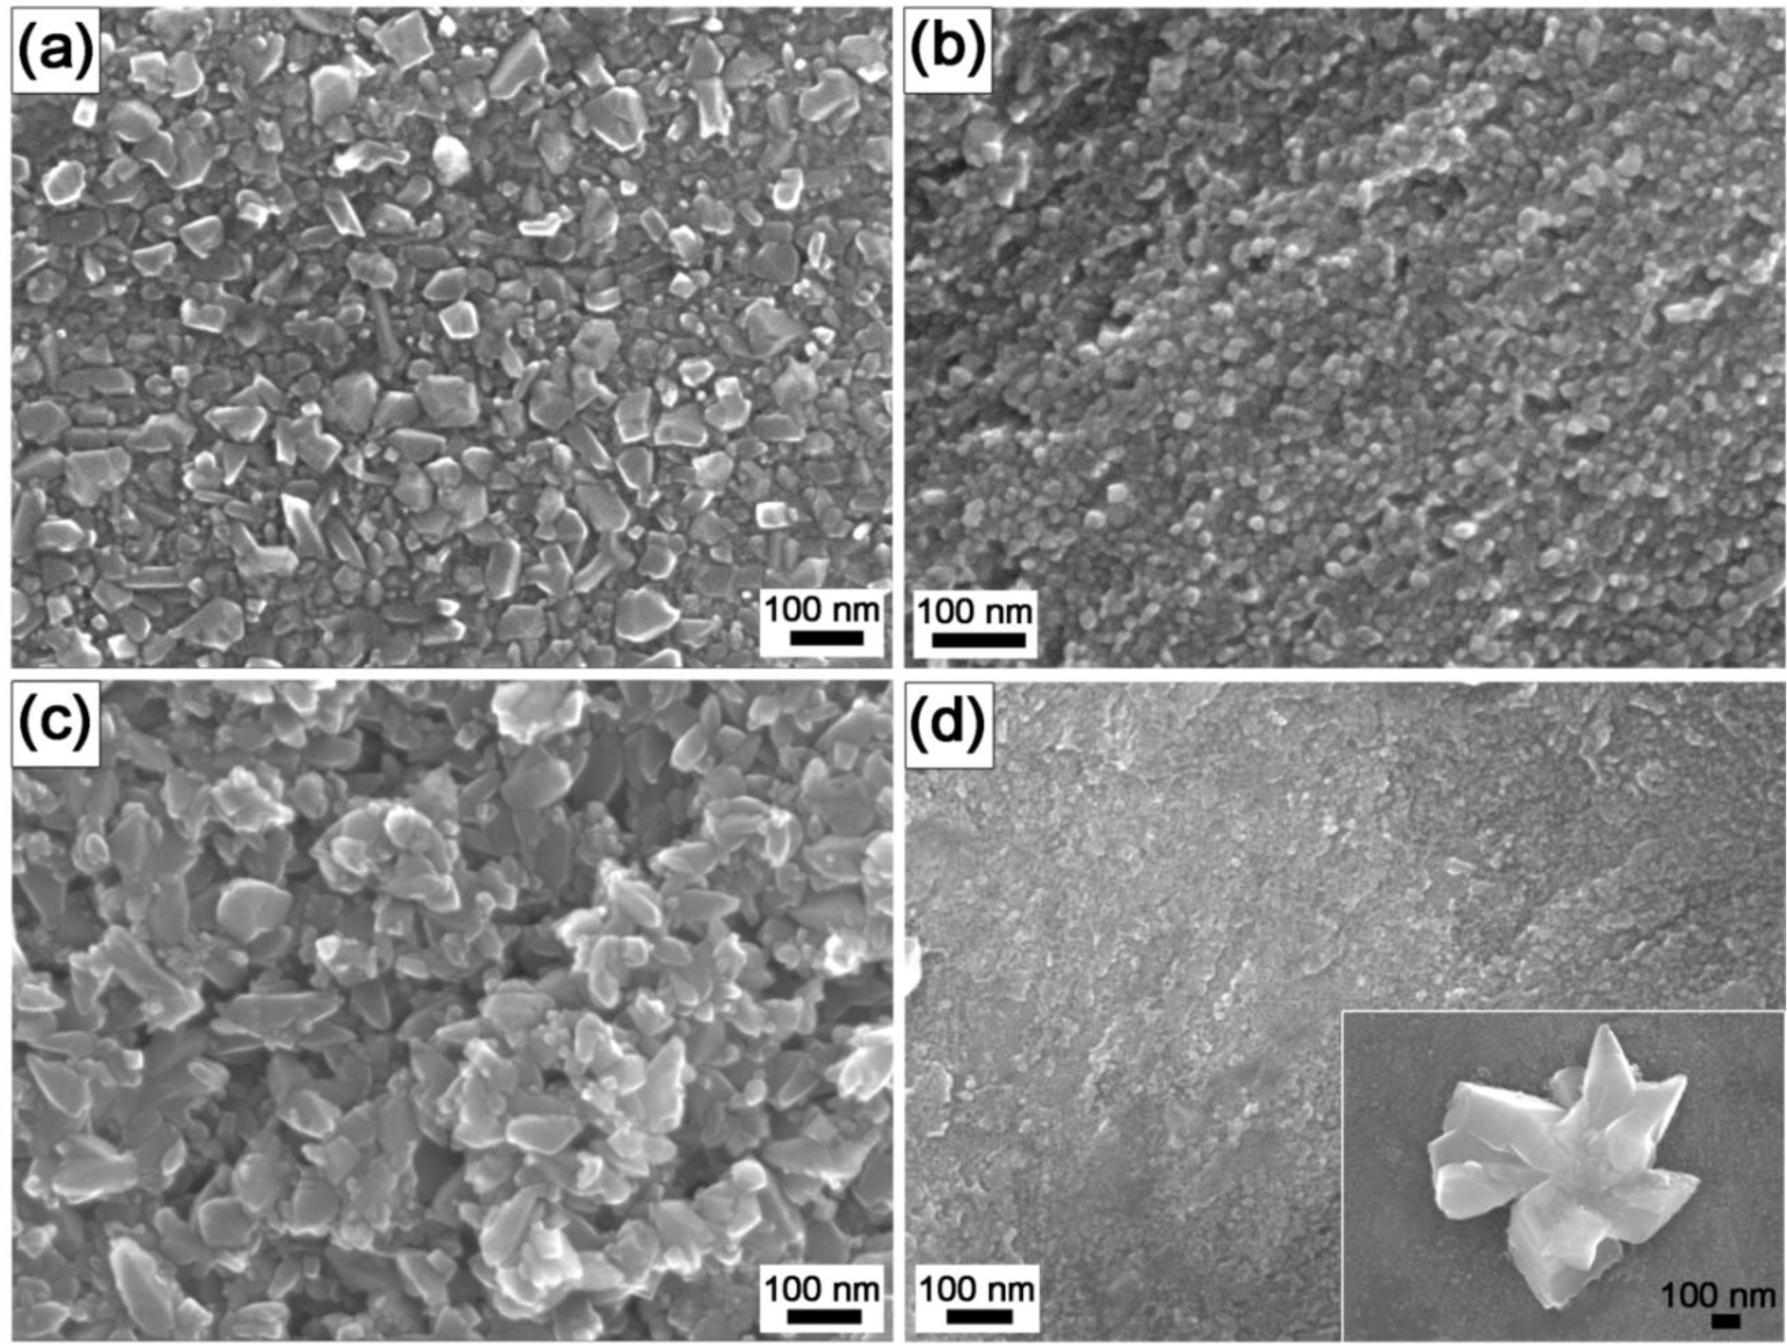 Materials | Free Full-Text | Improvement to the Corrosion Resistance of  Ti-Based Implants Using Hydrothermally Synthesized Nanostructured Anatase  Coatings | HTML